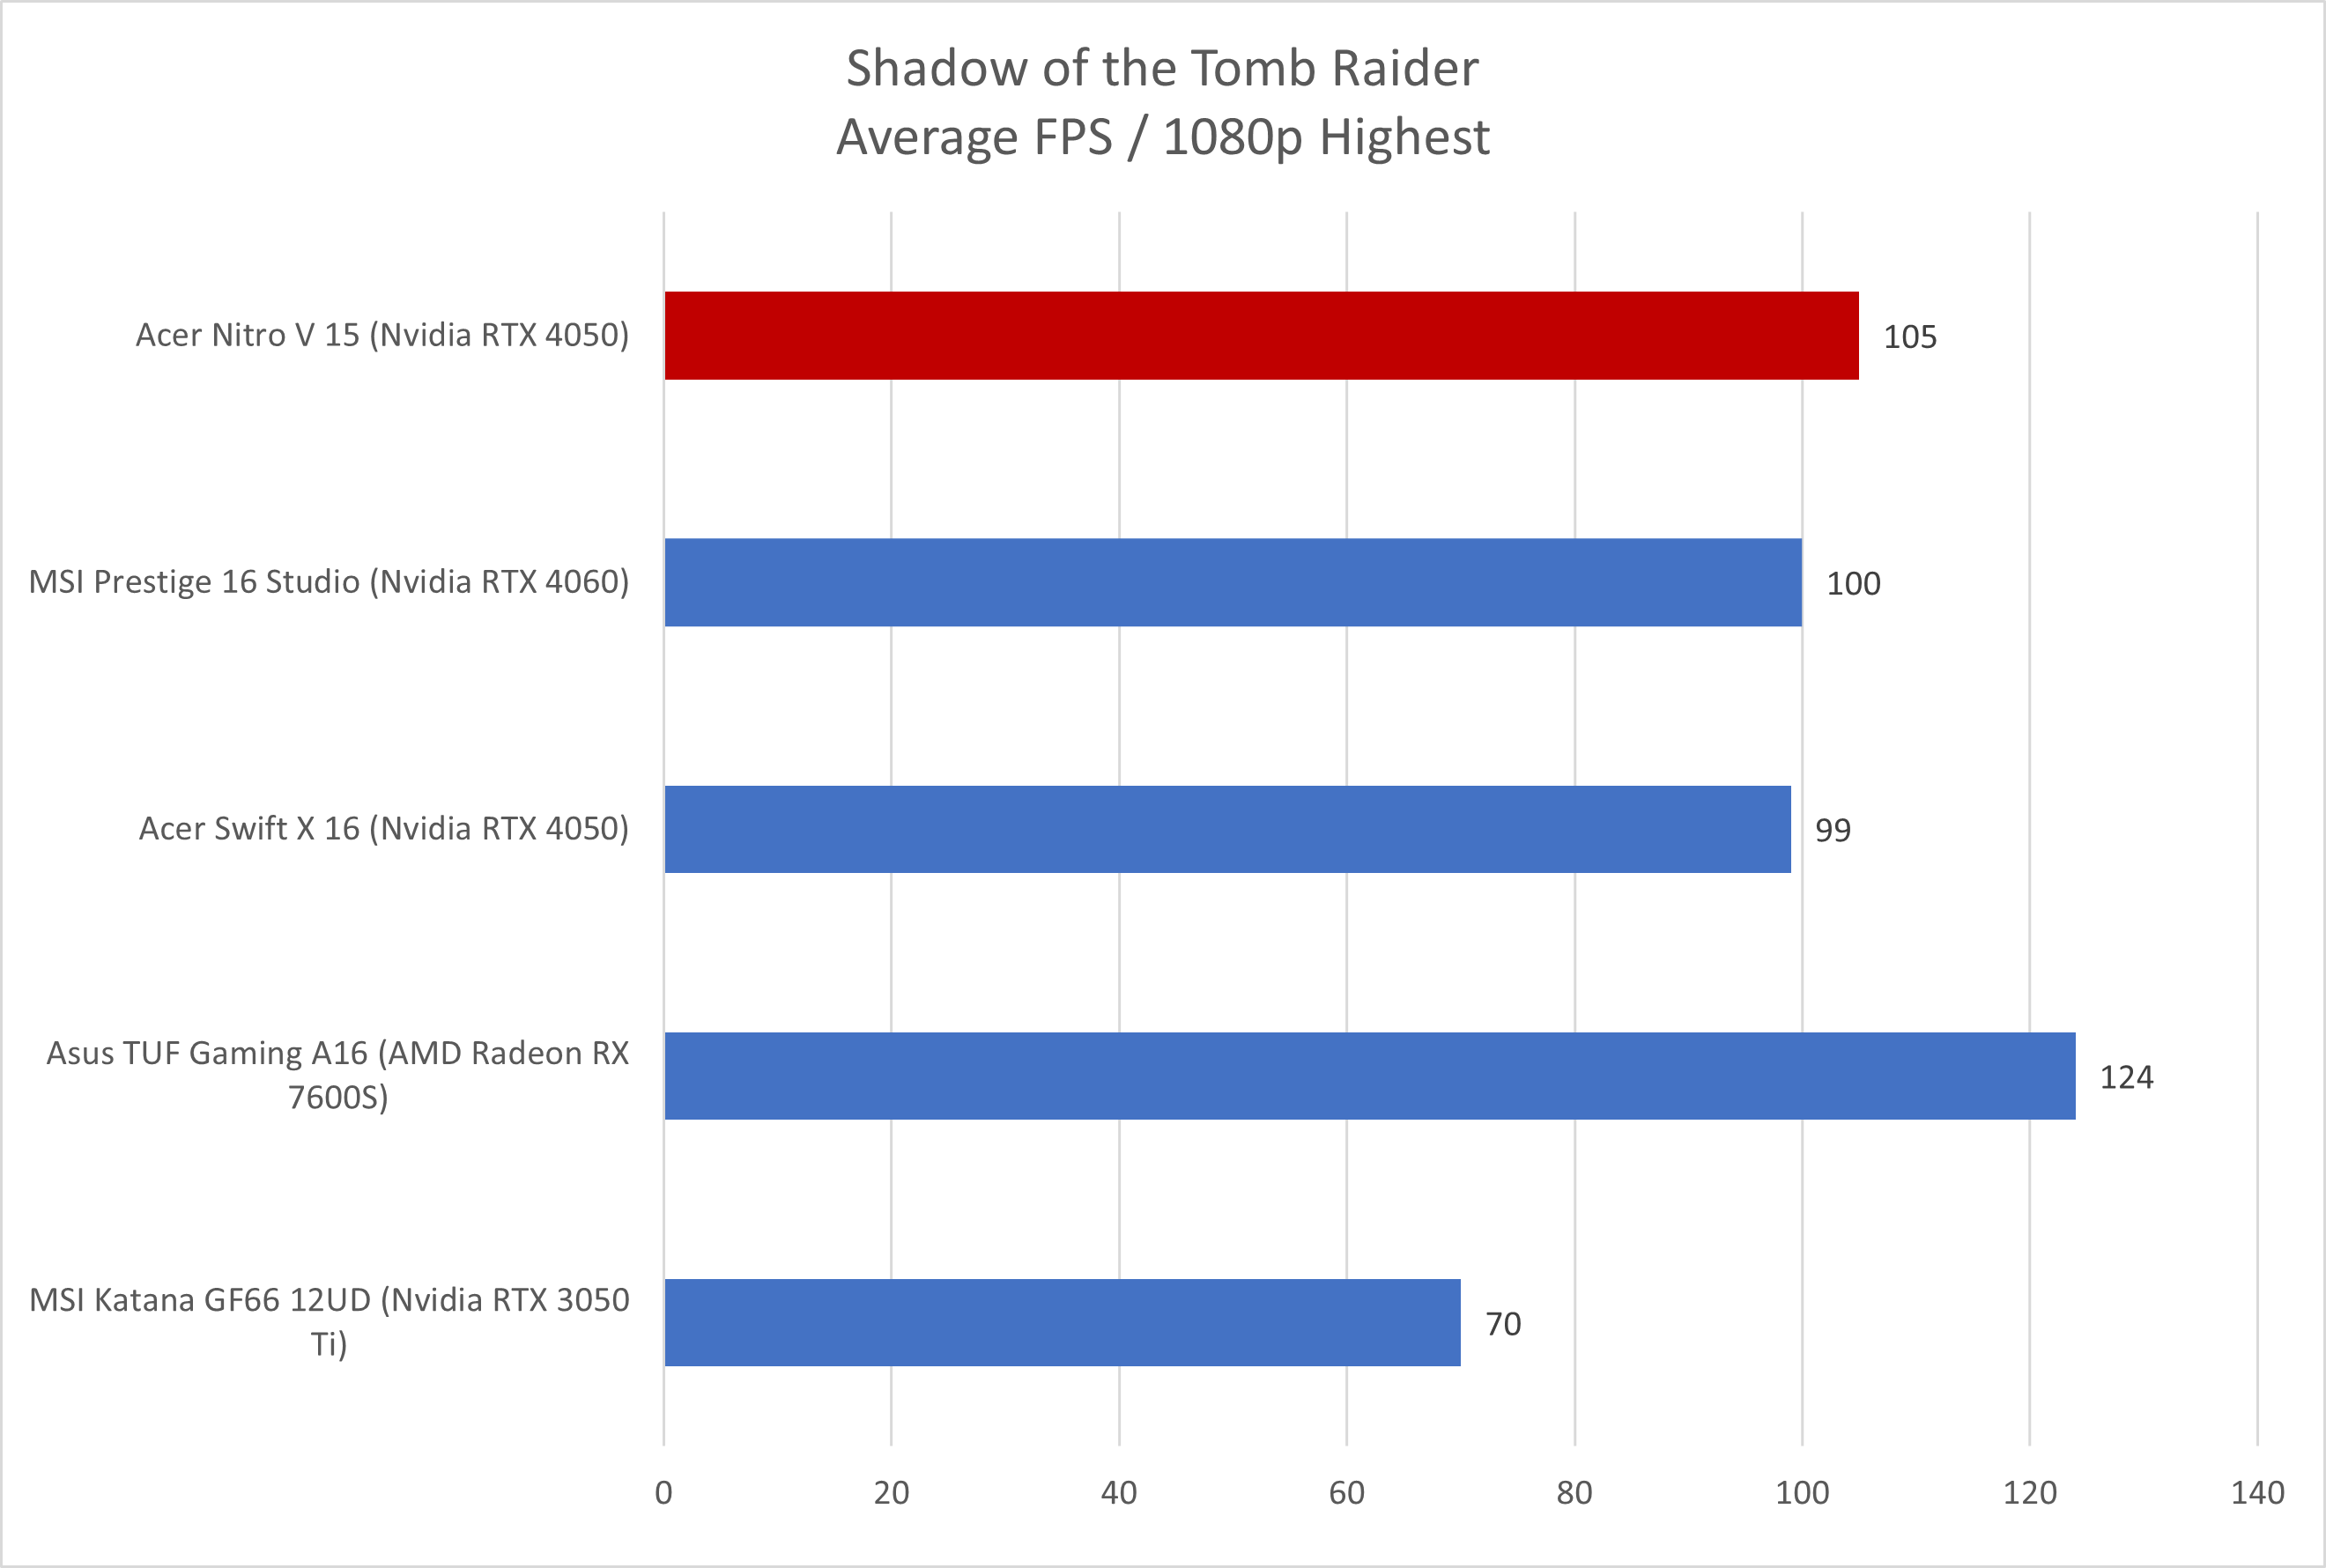 Acer Nitro V Shadow of the Tomb Raider results